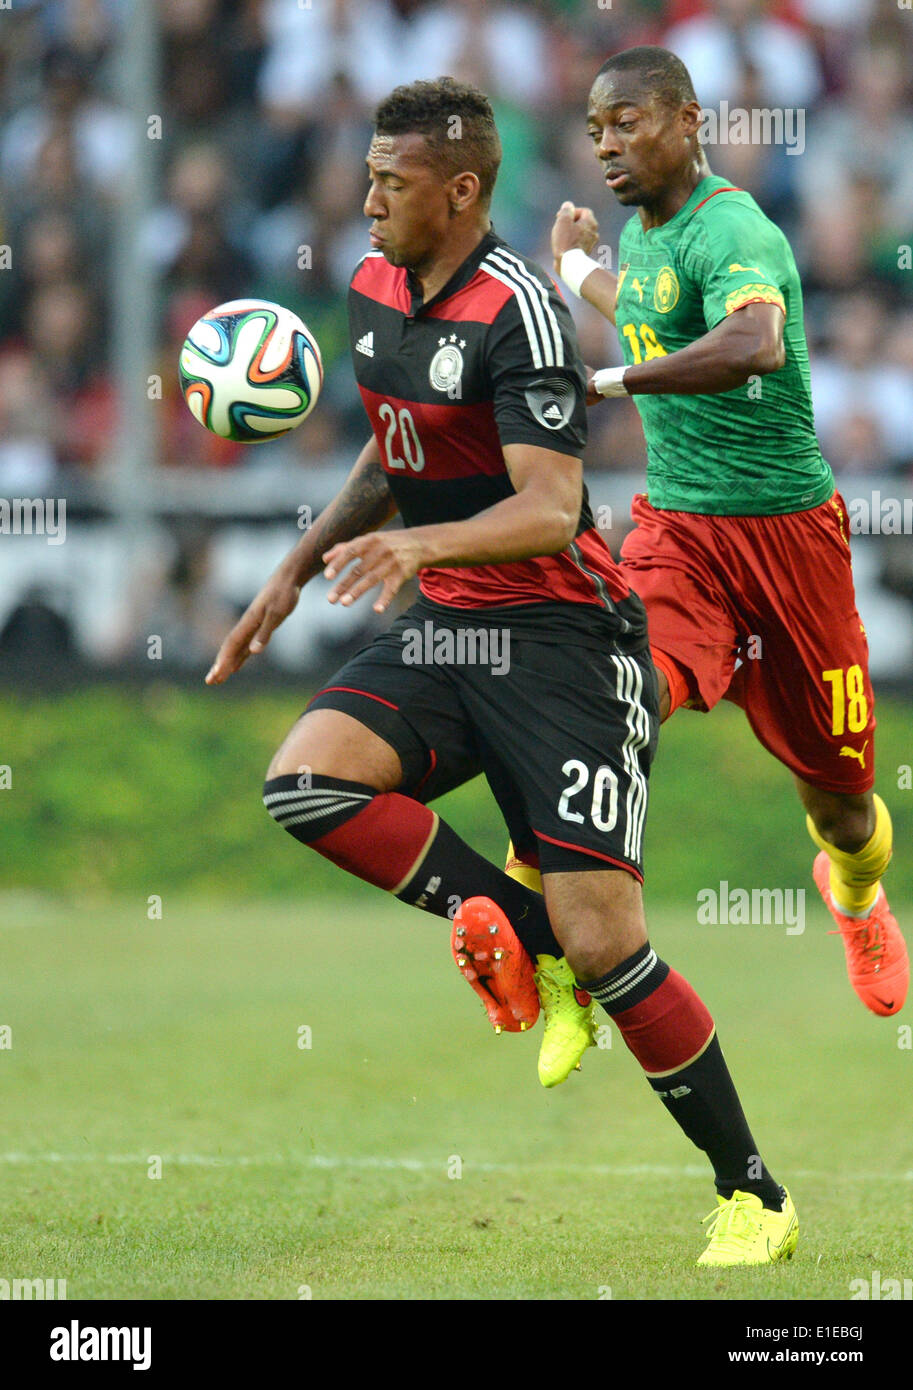 Moenchengladbach, Germany. 01st June, 2014. Germany's Jerome Boateng (L) in action in front of Cameroon's Enoh Eyong during the friendly soccer match between Germany and Cameroon at the Borussia Park stadium in Moenchengladbach, Germany, 01 June 2014. Photo: Bernd Thissen/dpa/Alamy Live News Stock Photo